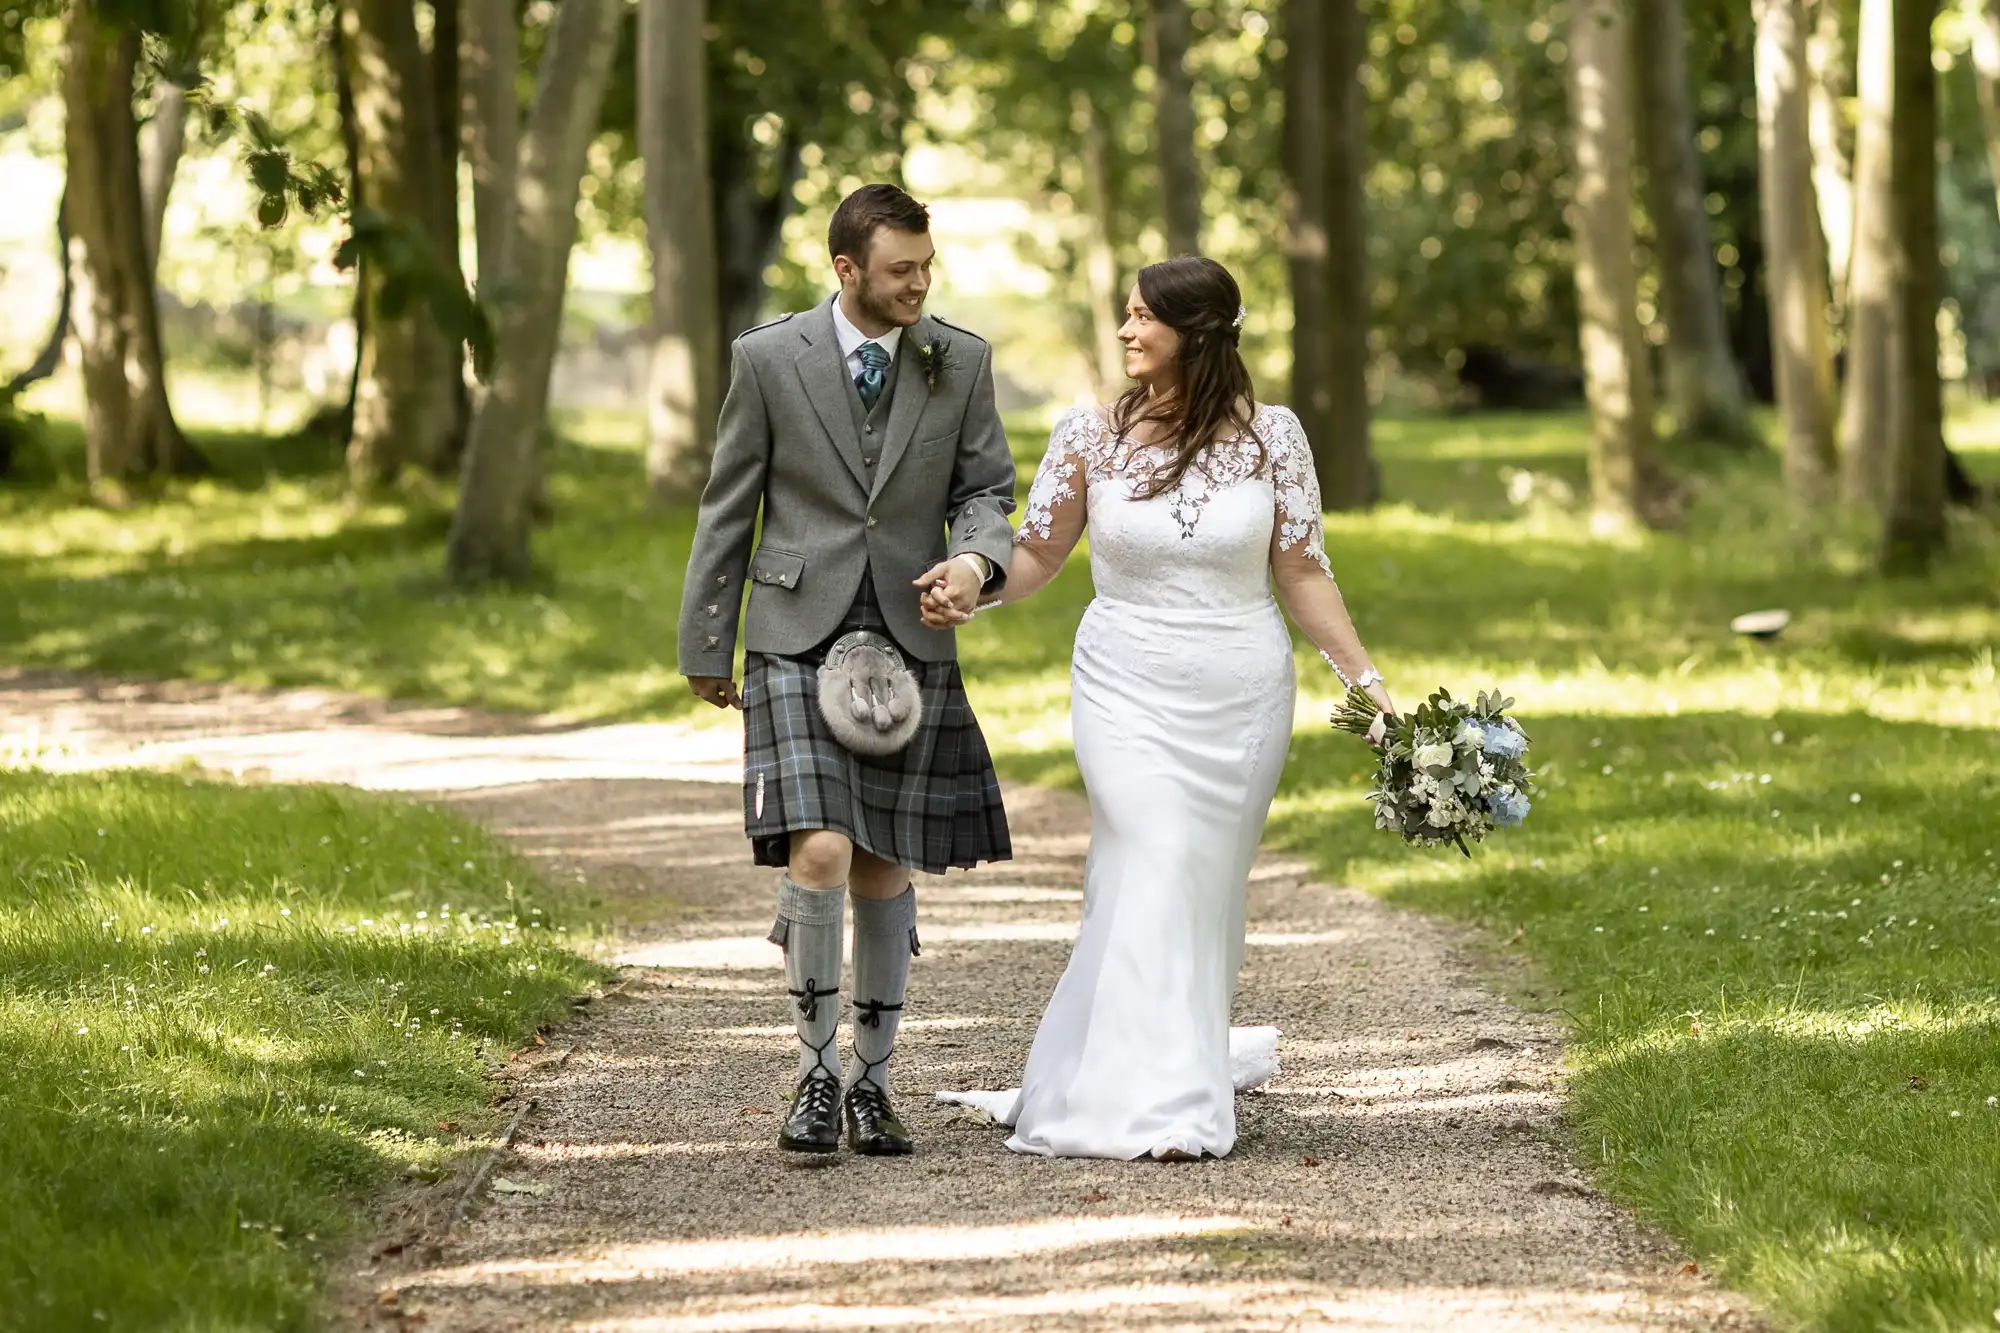 A bride and groom walking hand in hand on a tree-lined path, the groom wearing a kilt and the bride in a white lace gown.